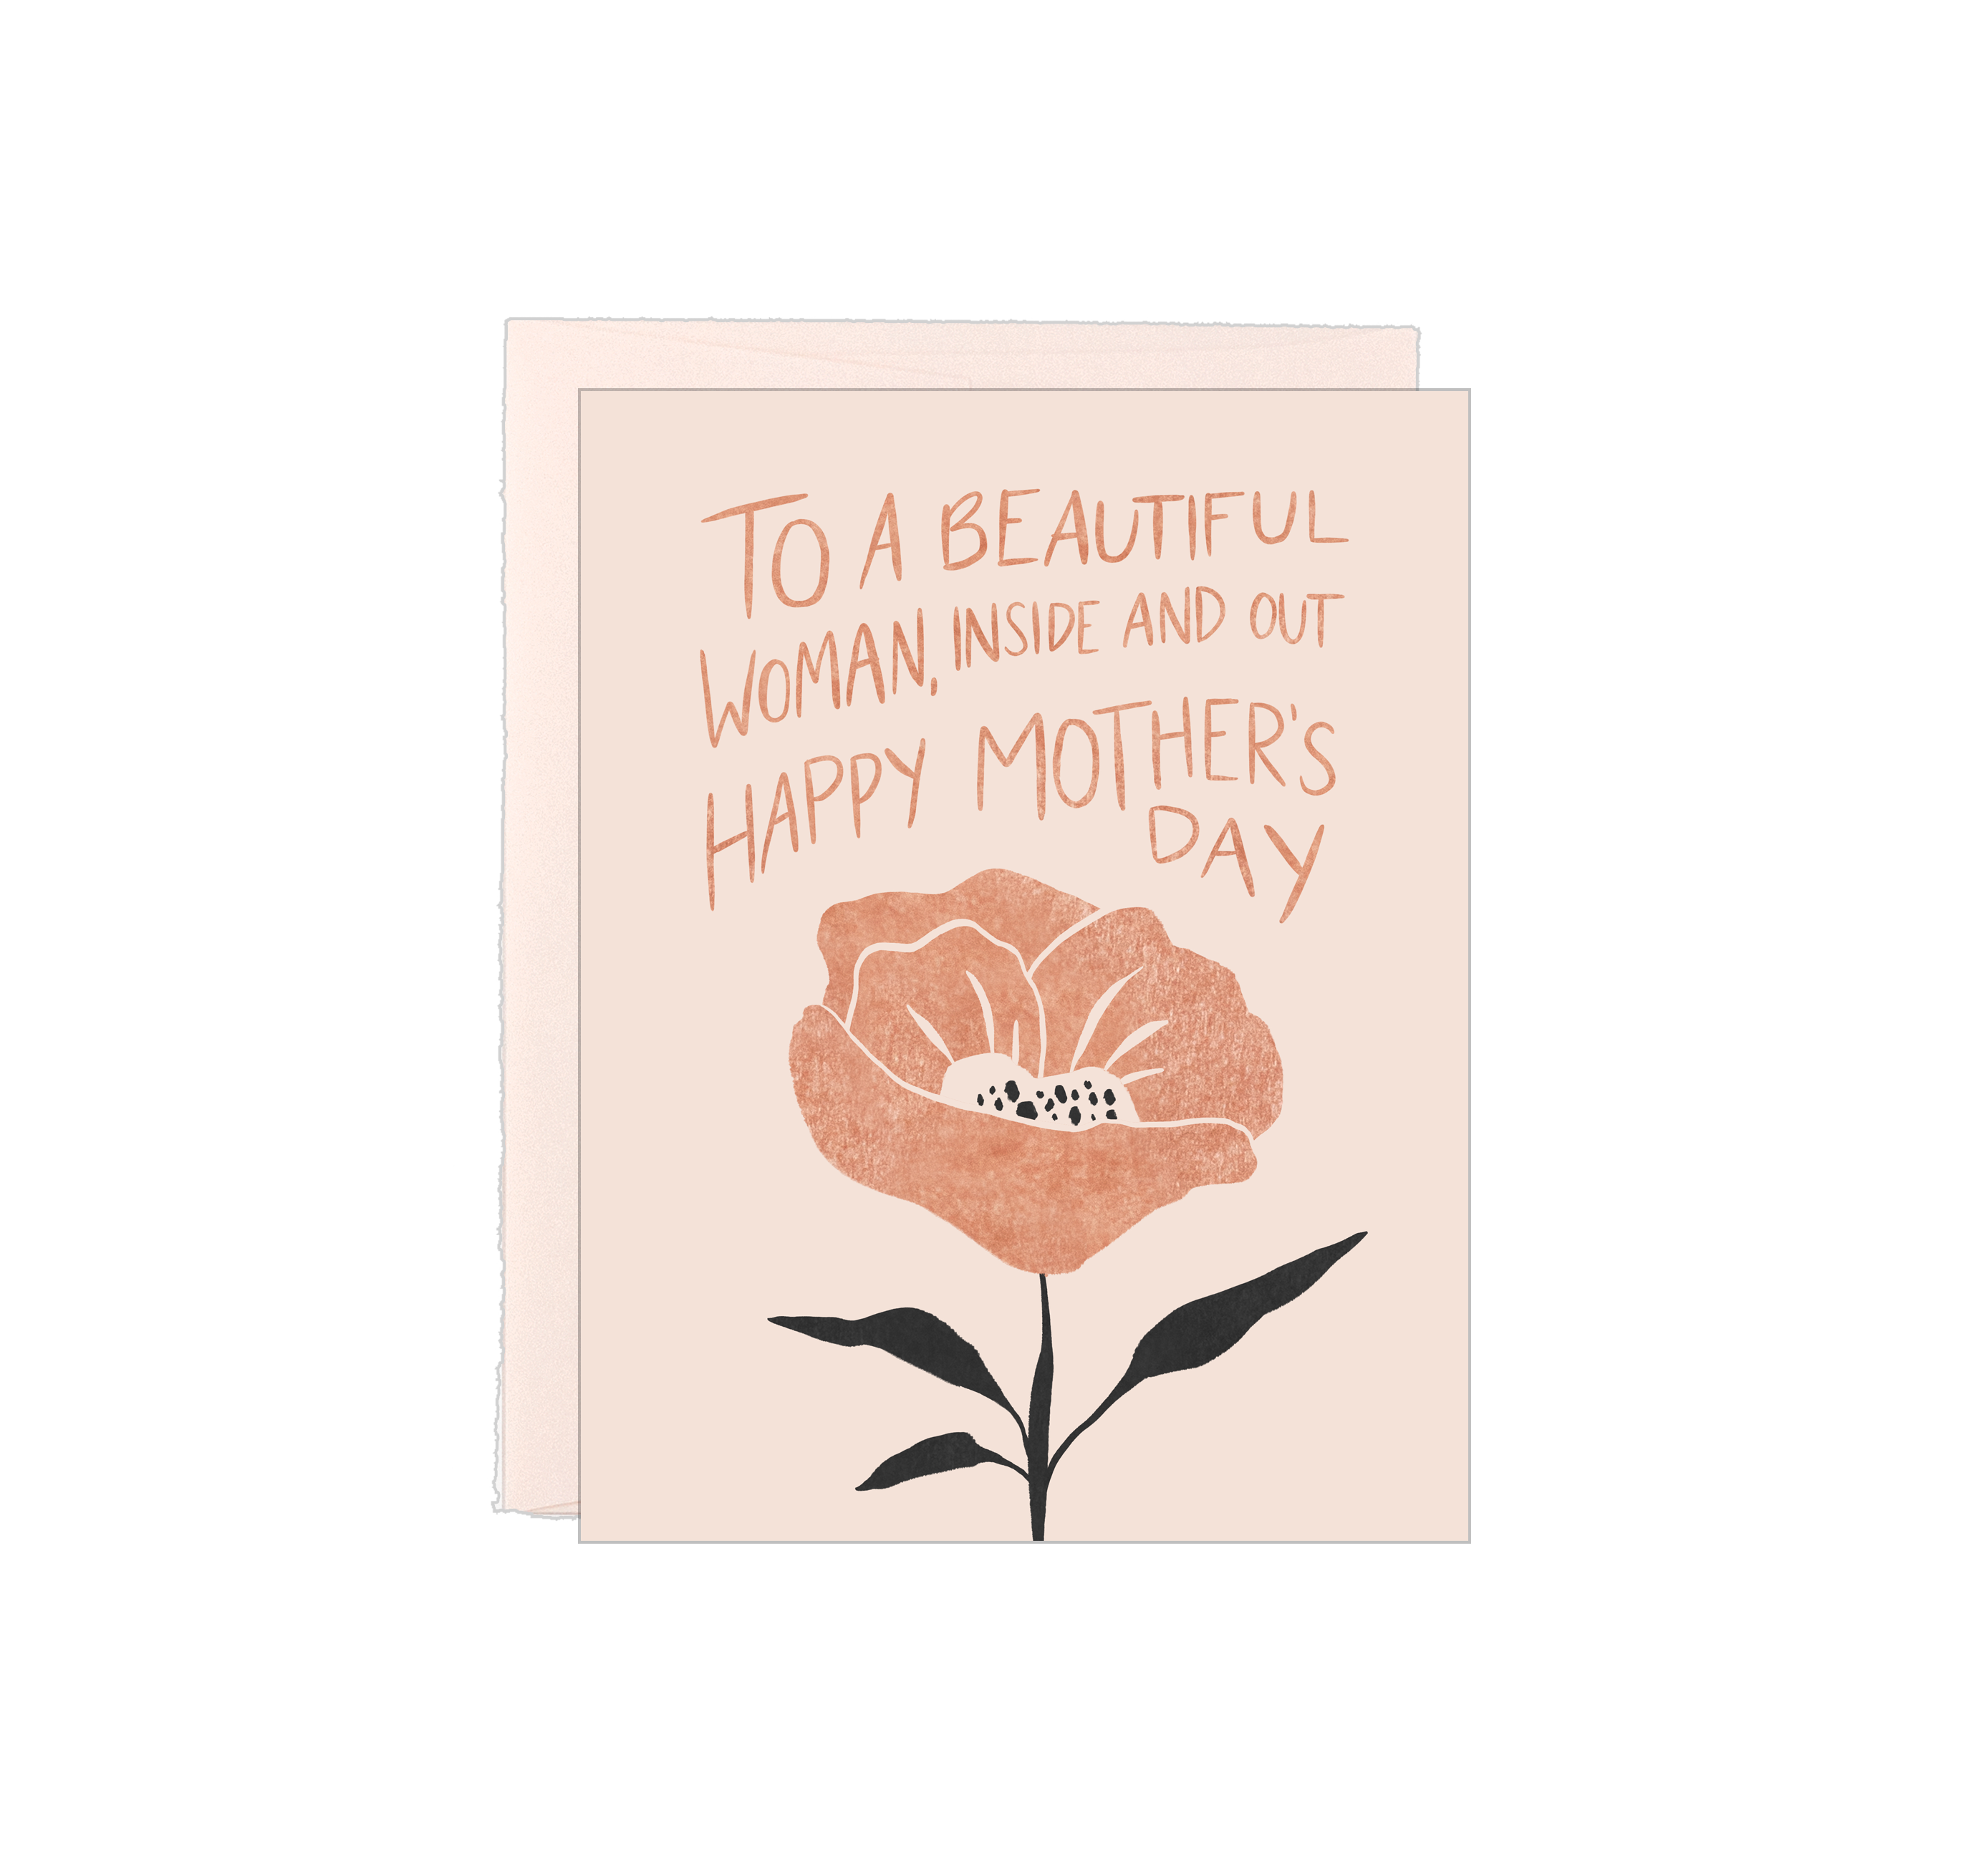 To a Beautiful Woman - Happy Mother's Day